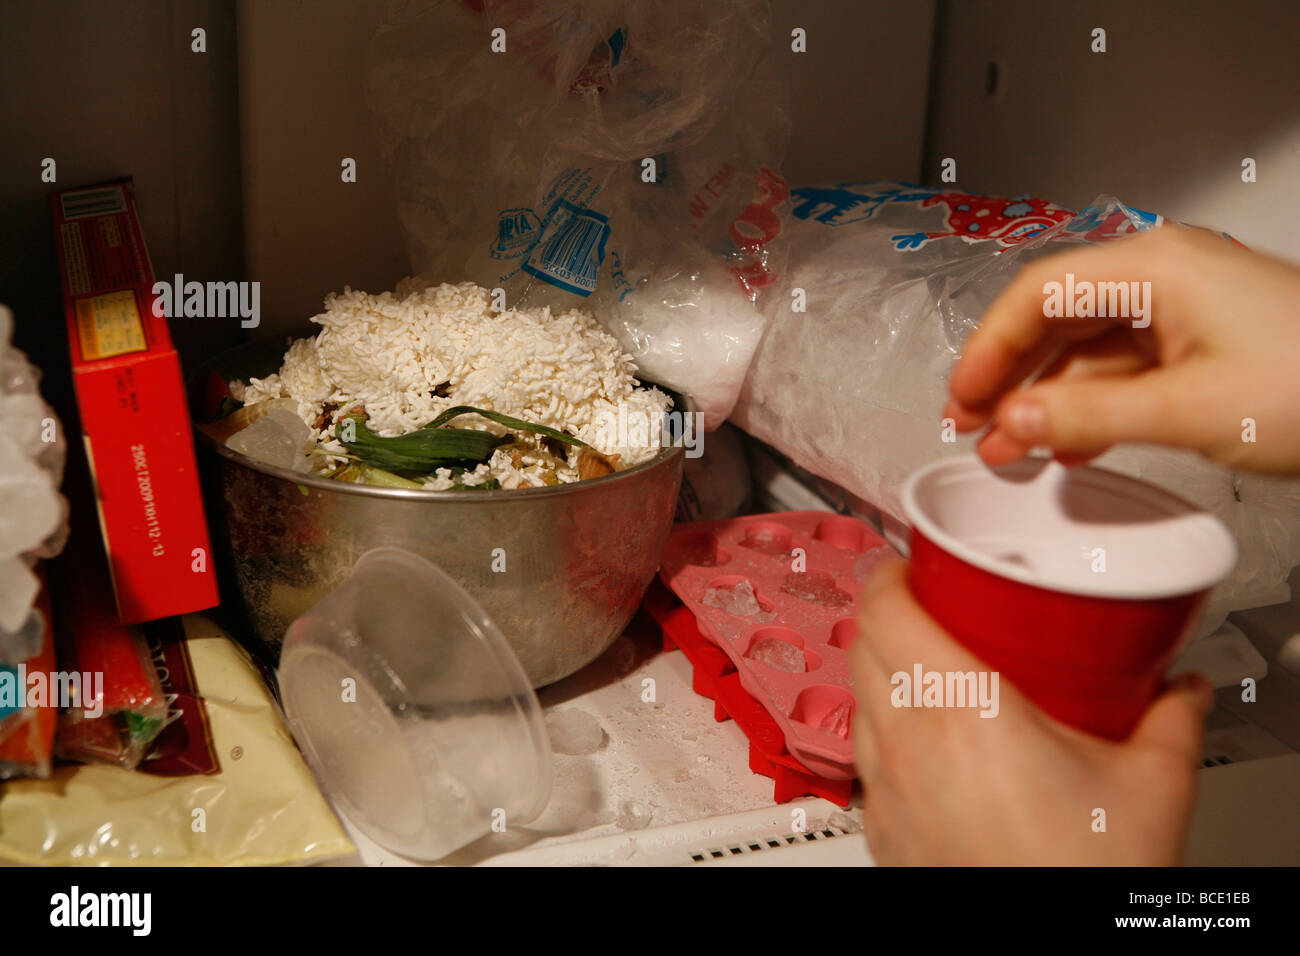 A partier fills a plastic cup with icecubes during a winter party. Stock Photo